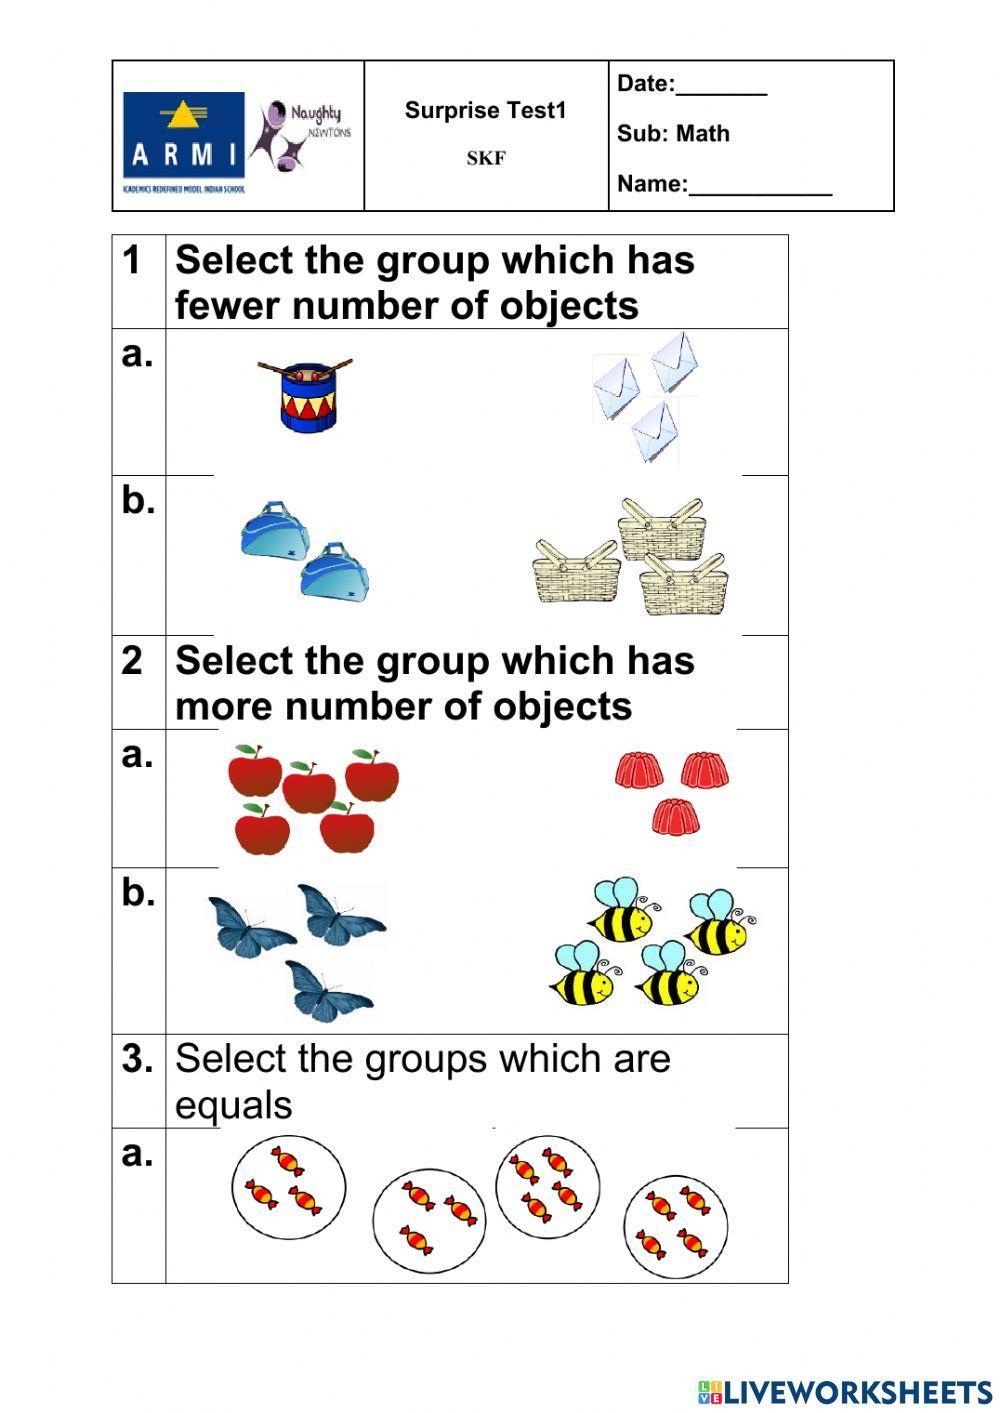 Comparing quantities of identical objects